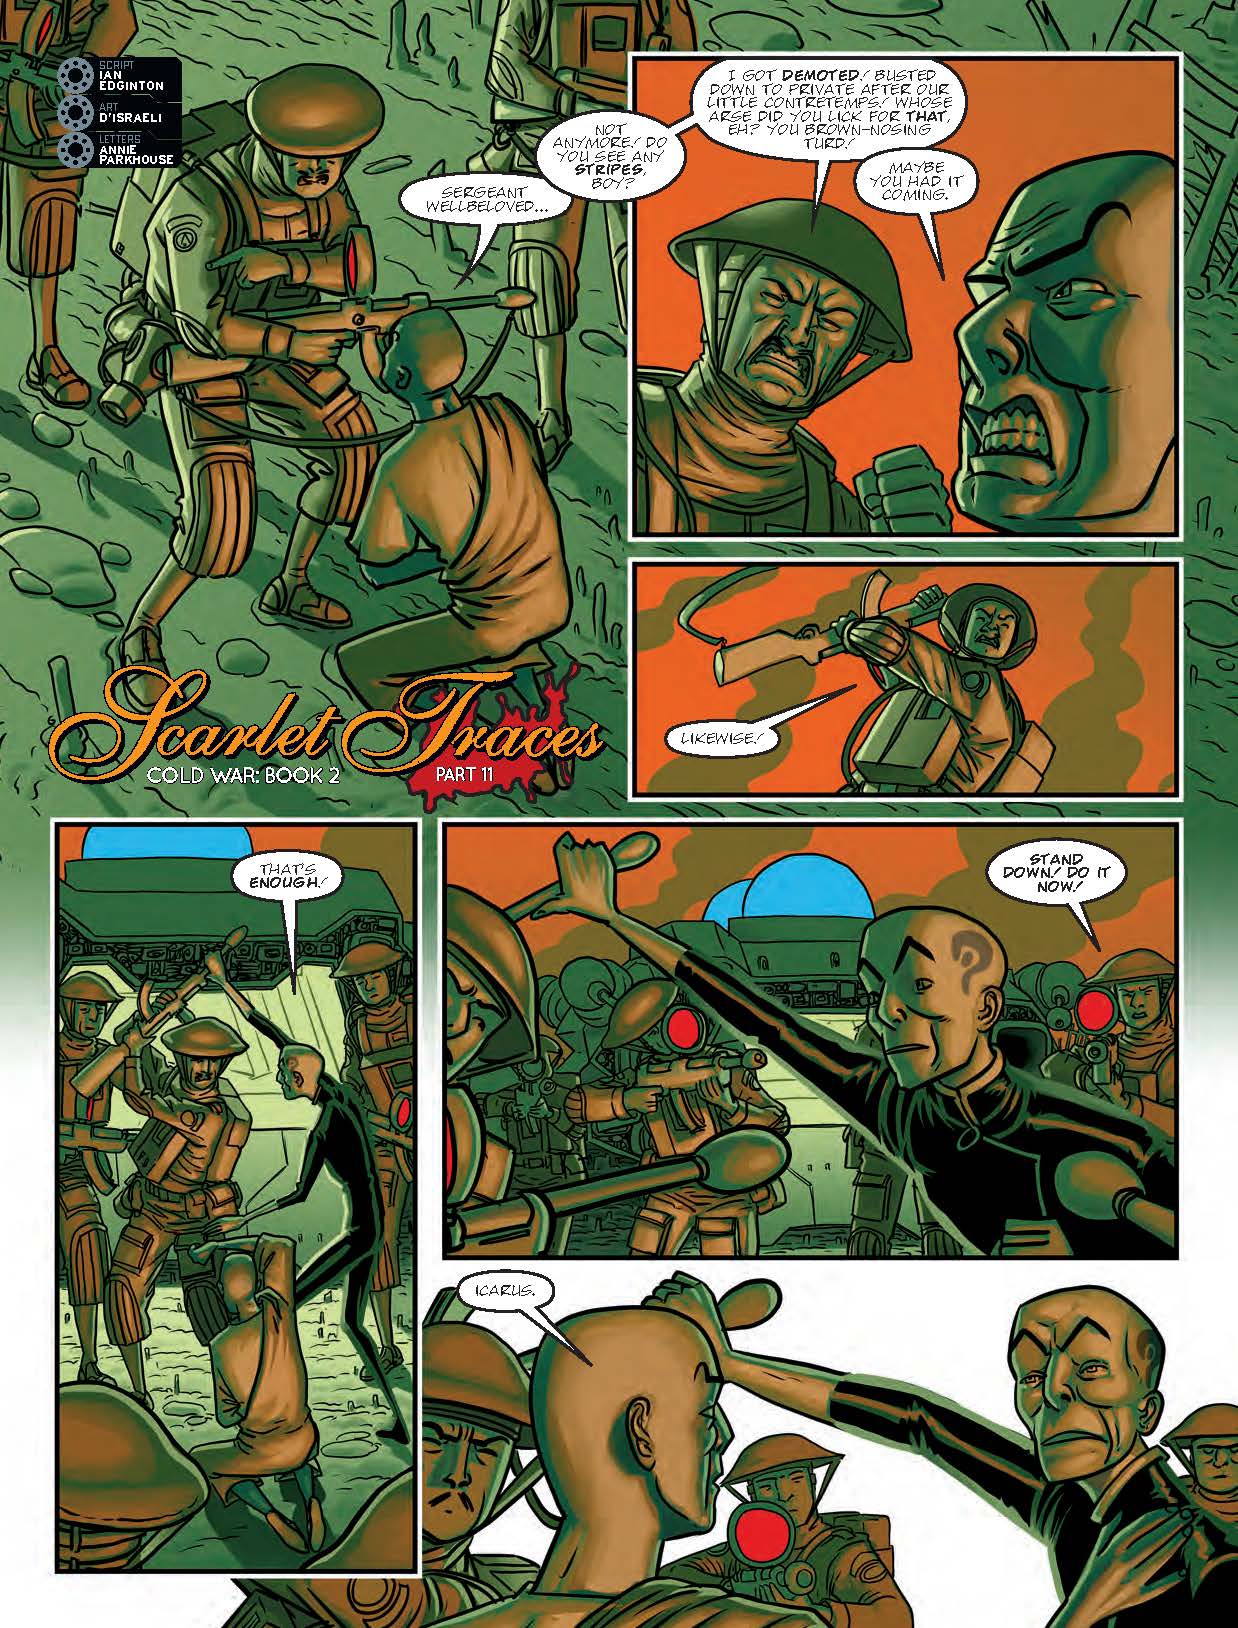 2000AD 2033 Scarlet Traces: Cold War Book 2 - Part 11